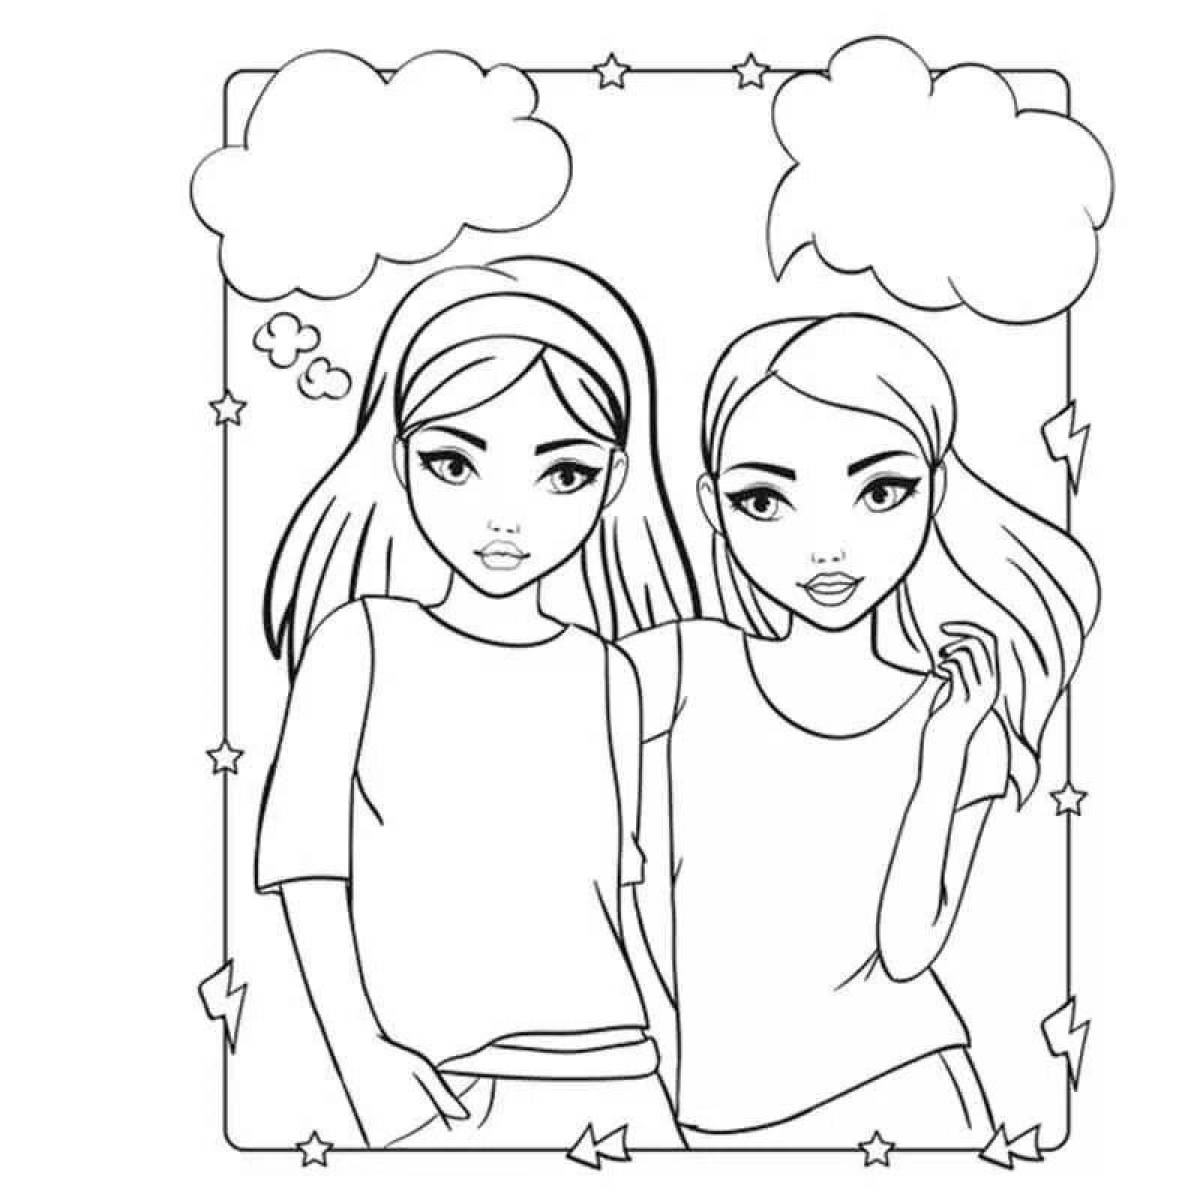 Creative coloring book for girls 12 years old for vr